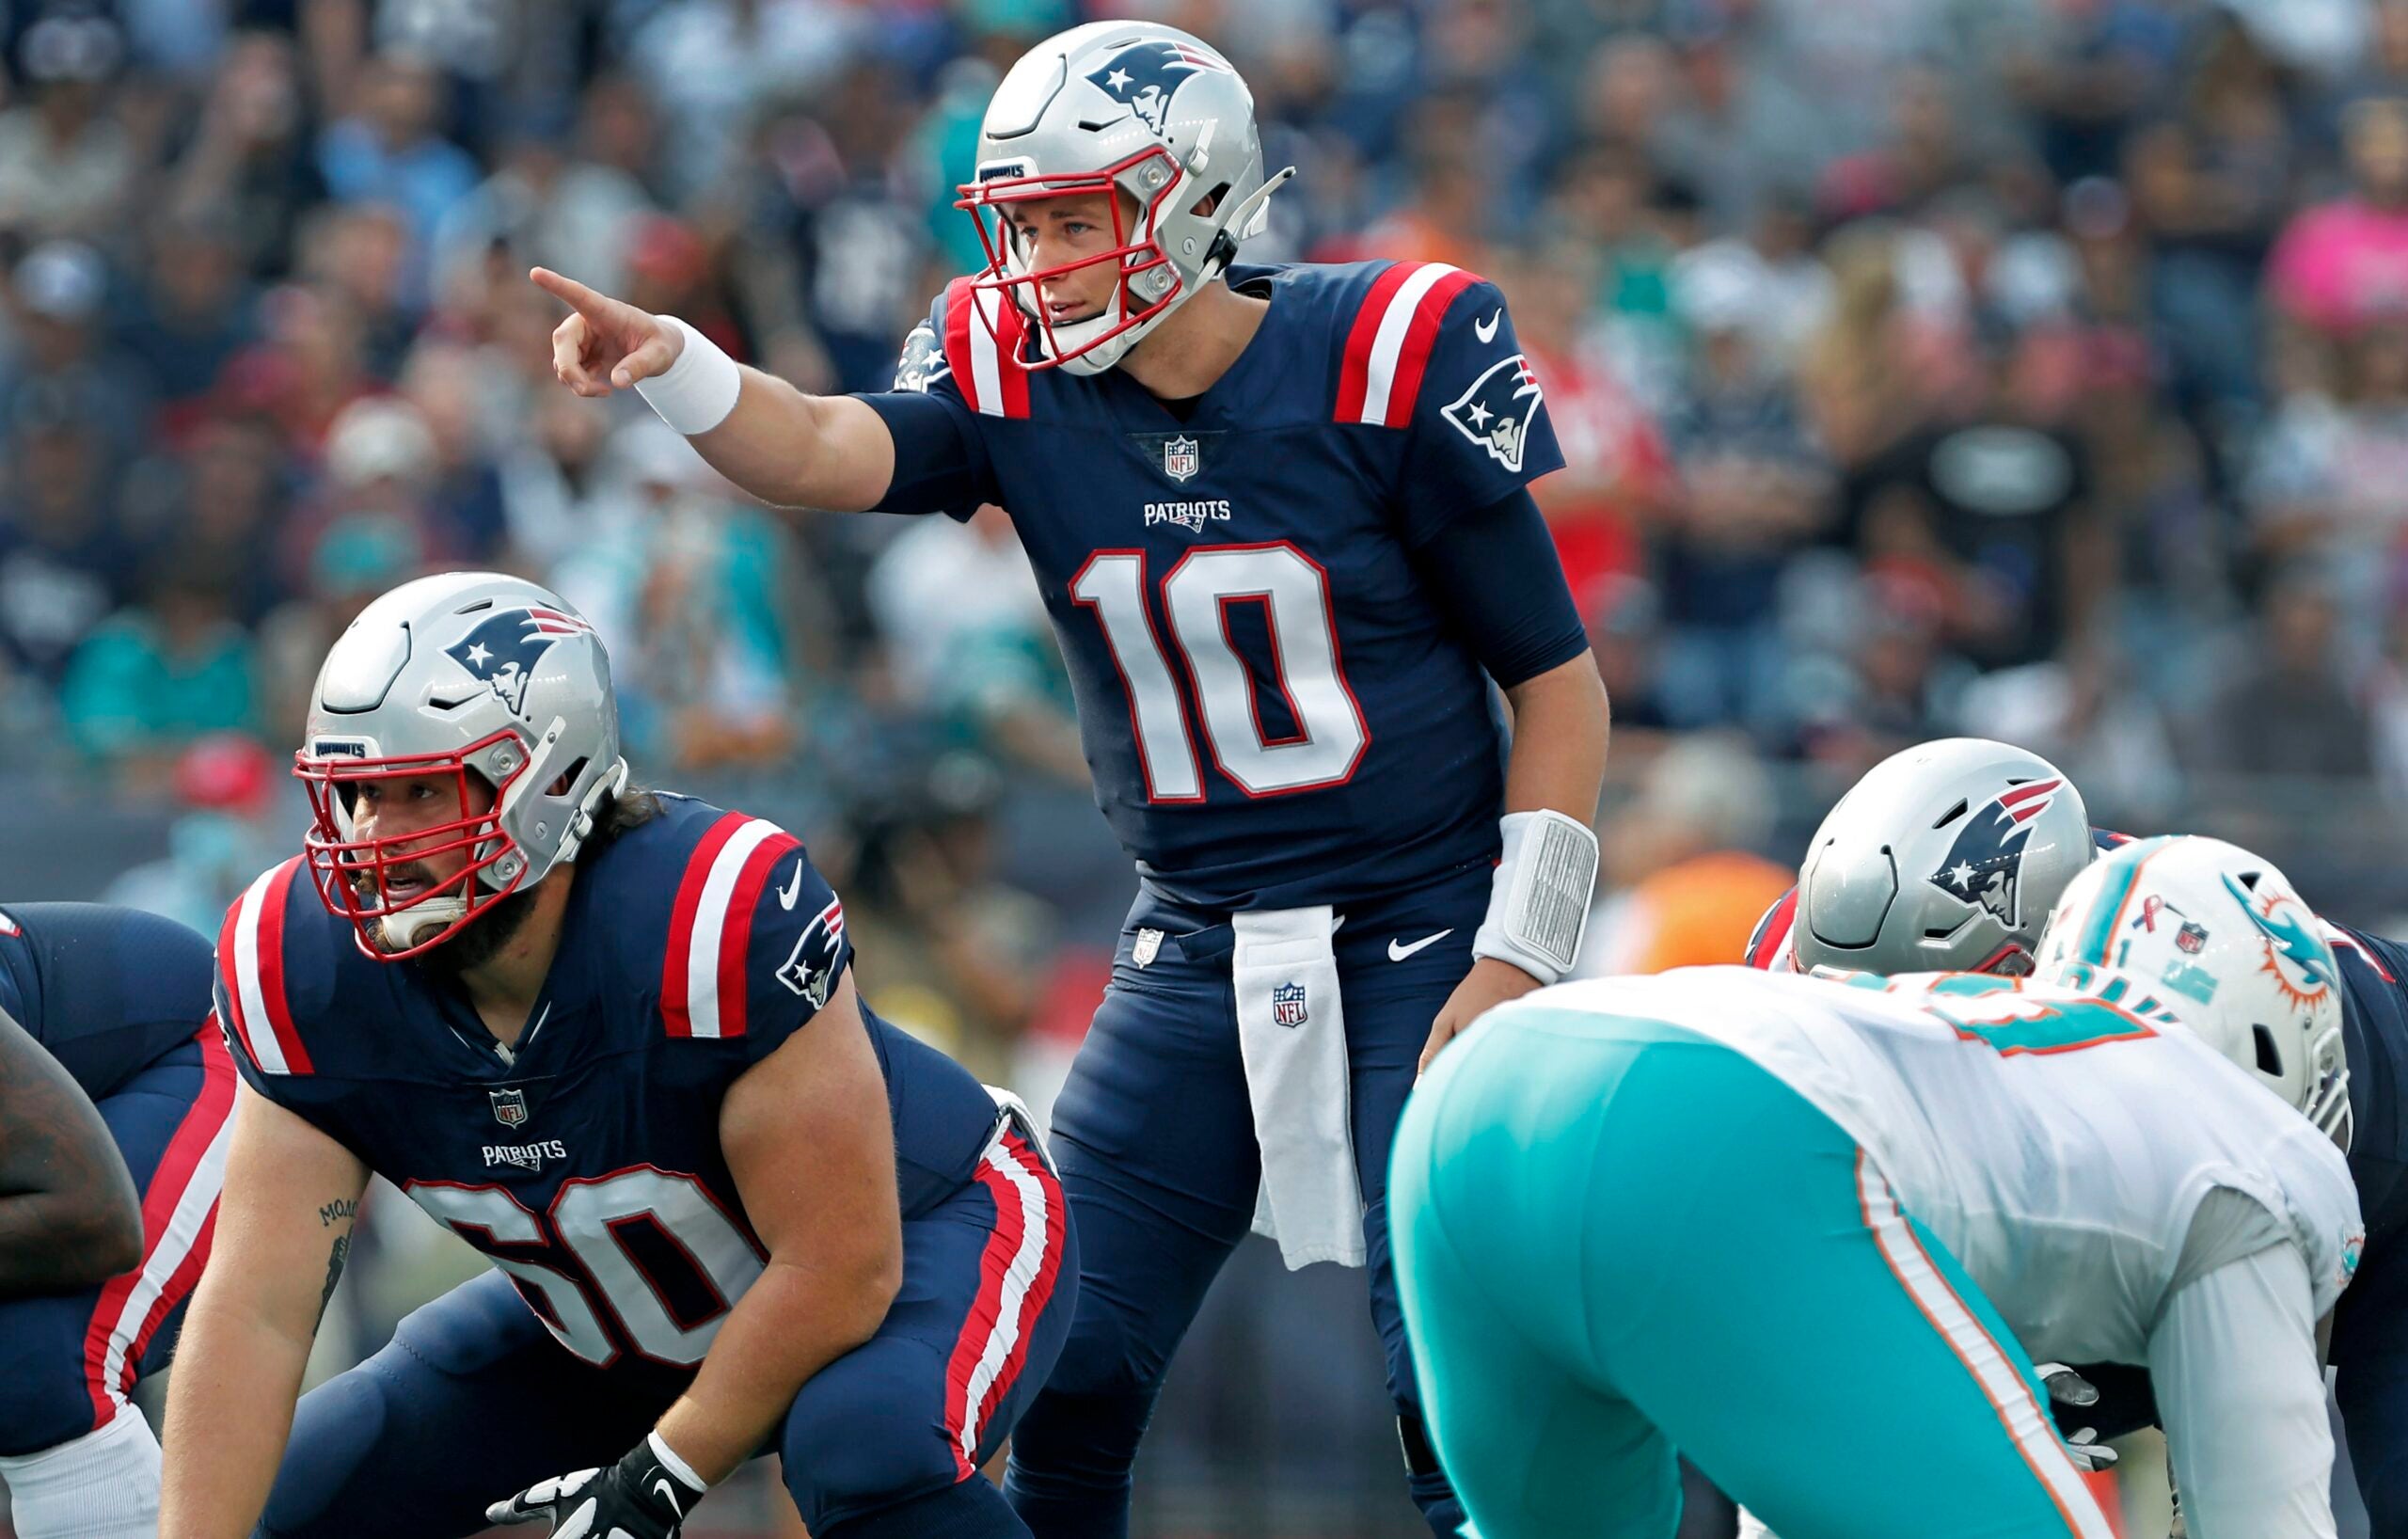 NFL Week 2 Sunday Night Football: Dolphins' high-powered offense faces  tough task against Patriots defense